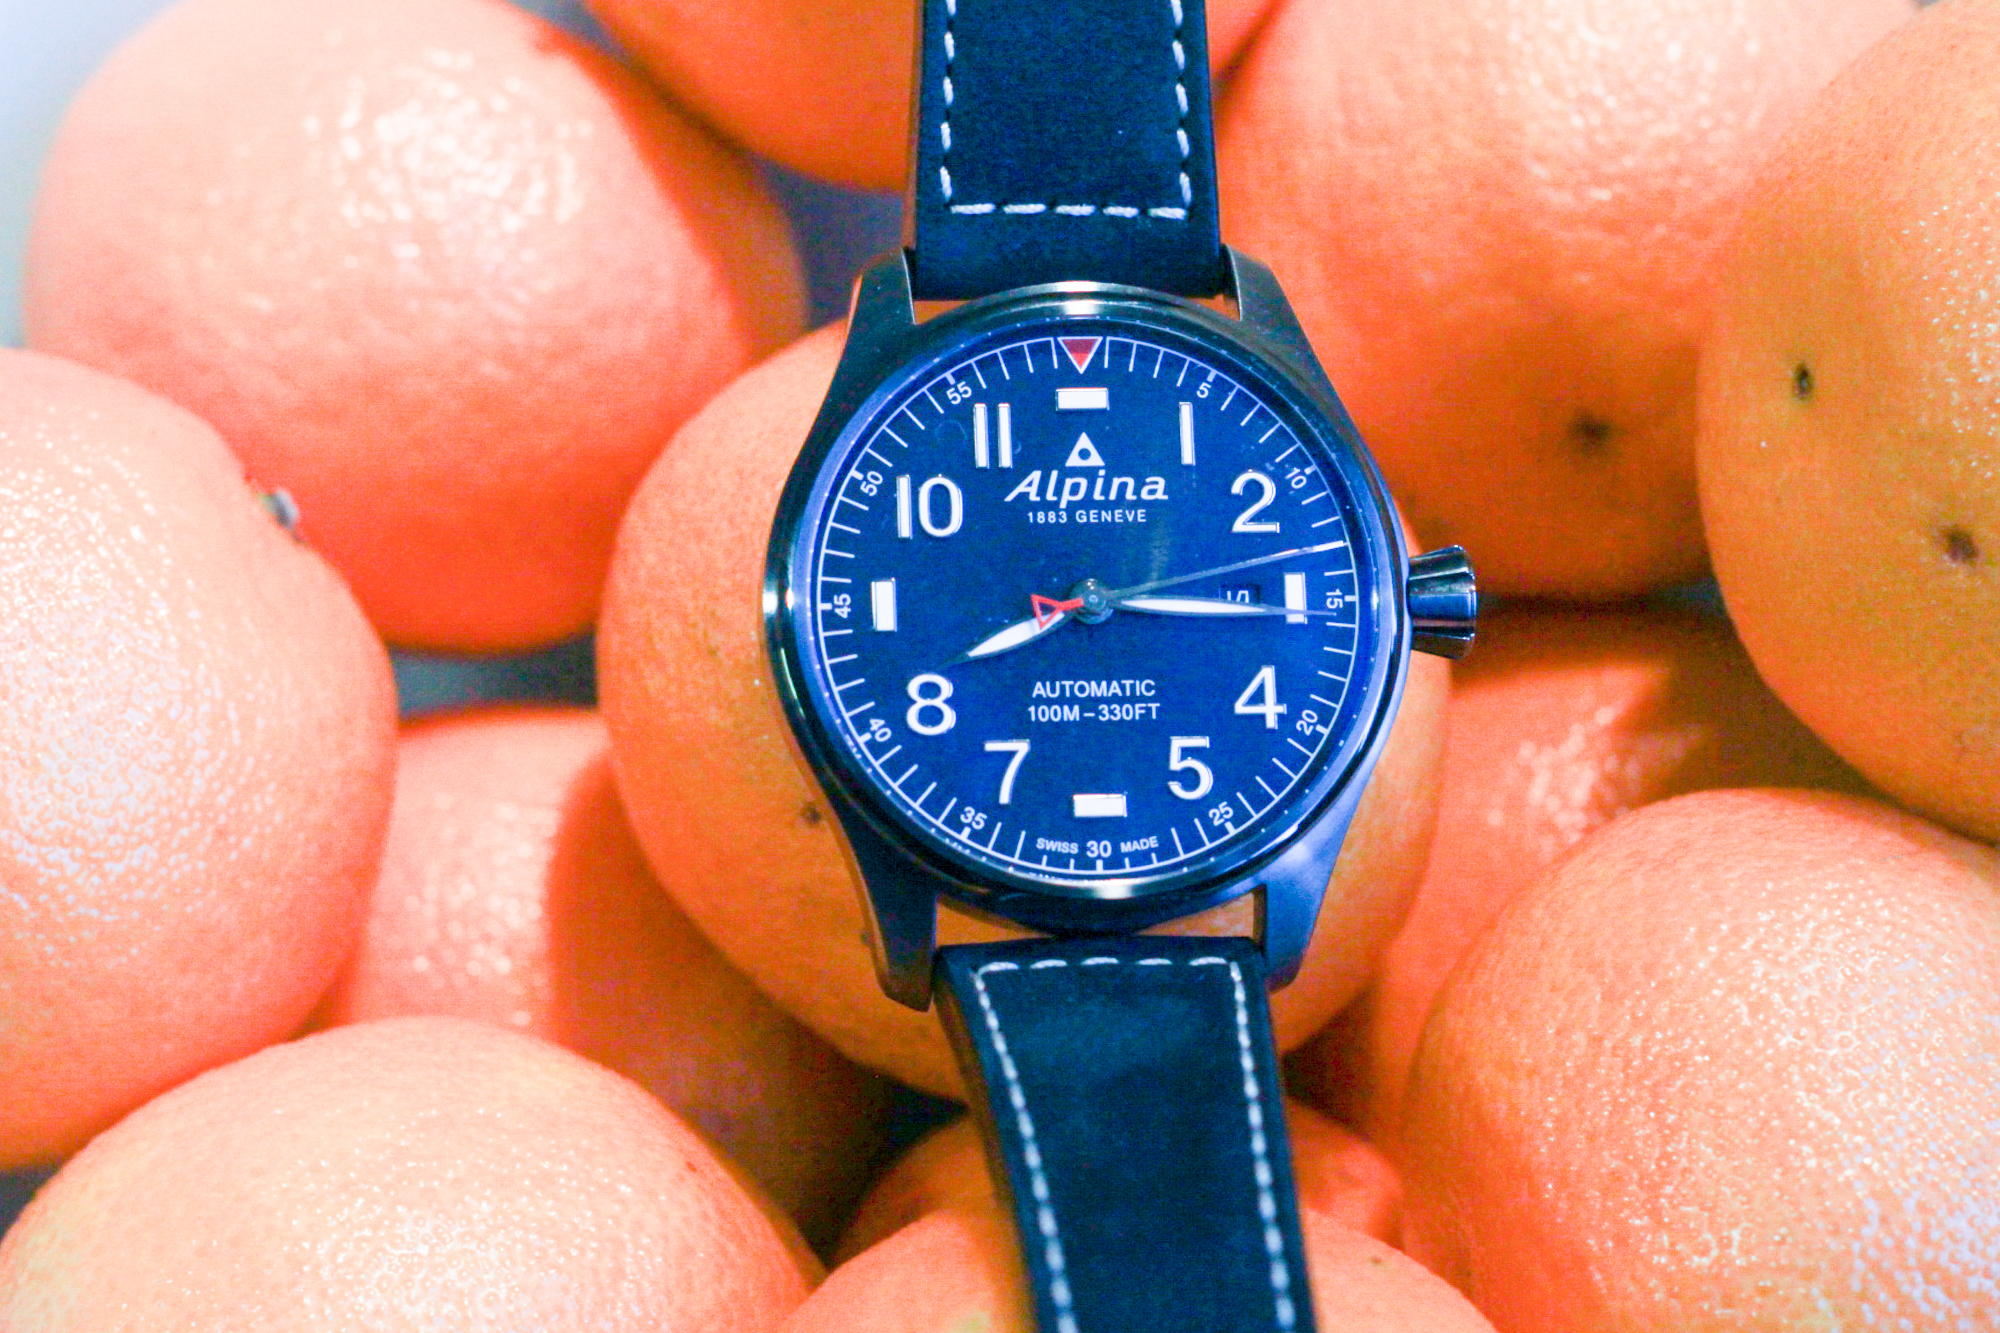 A week on the wrist with the Alpina Startimer